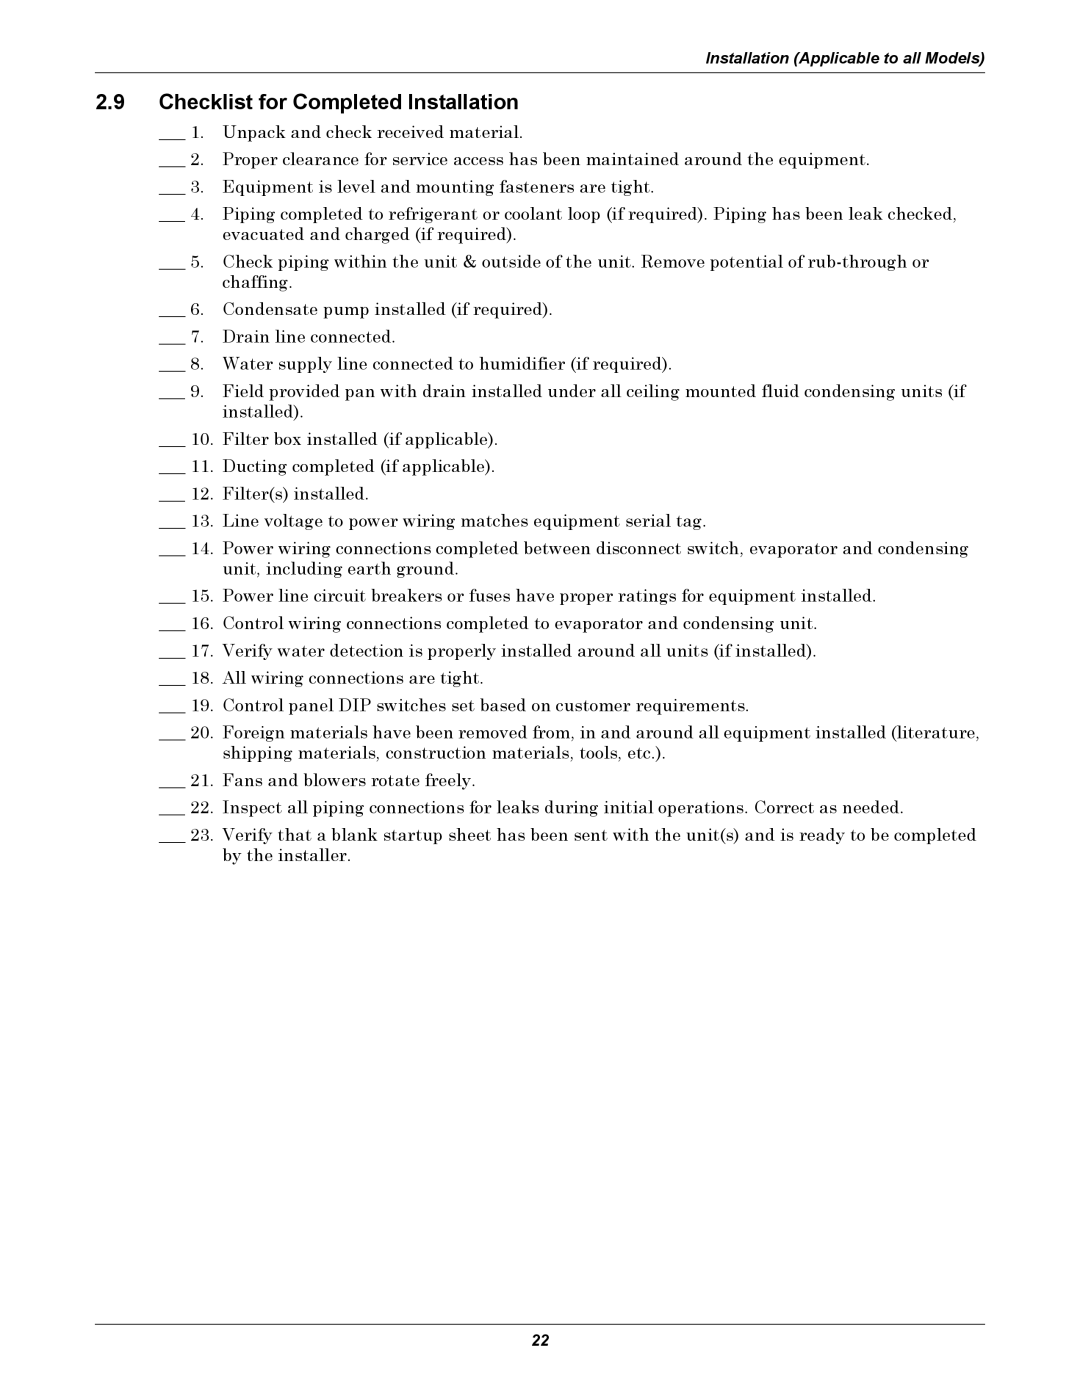 Emerson 3000 installation manual 2.9Checklist for Completed Installation 